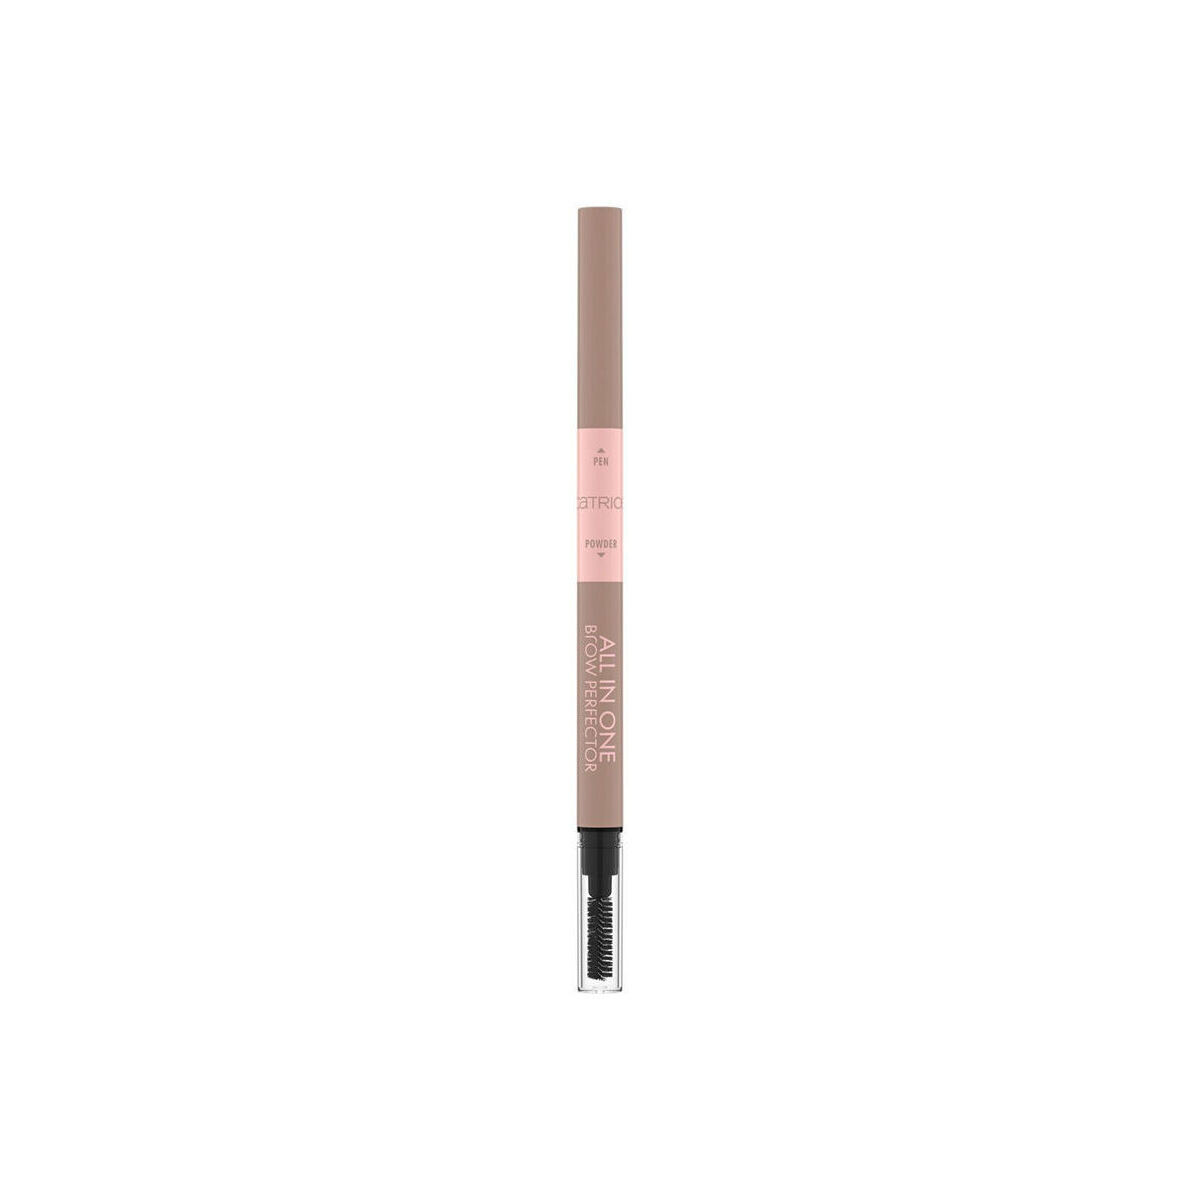 Beauté Femme Maquillage Sourcils Catrice Crayon À Sourcils All In One Brow Perfector 010-blond 0,4 Gr 